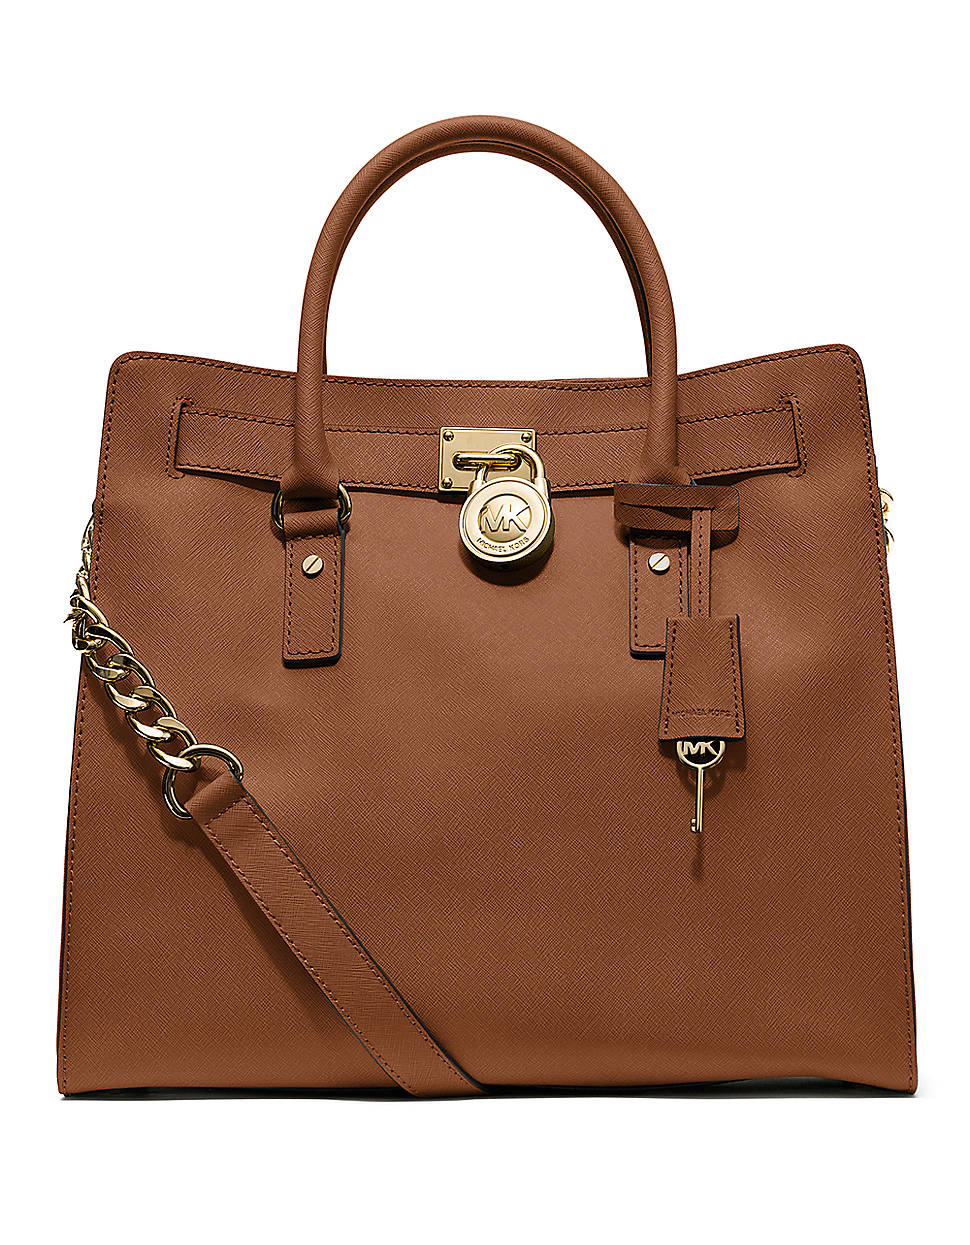 Michael Michael Kors Hamilton Large Leather Tote Bag in Brown (luggage ...